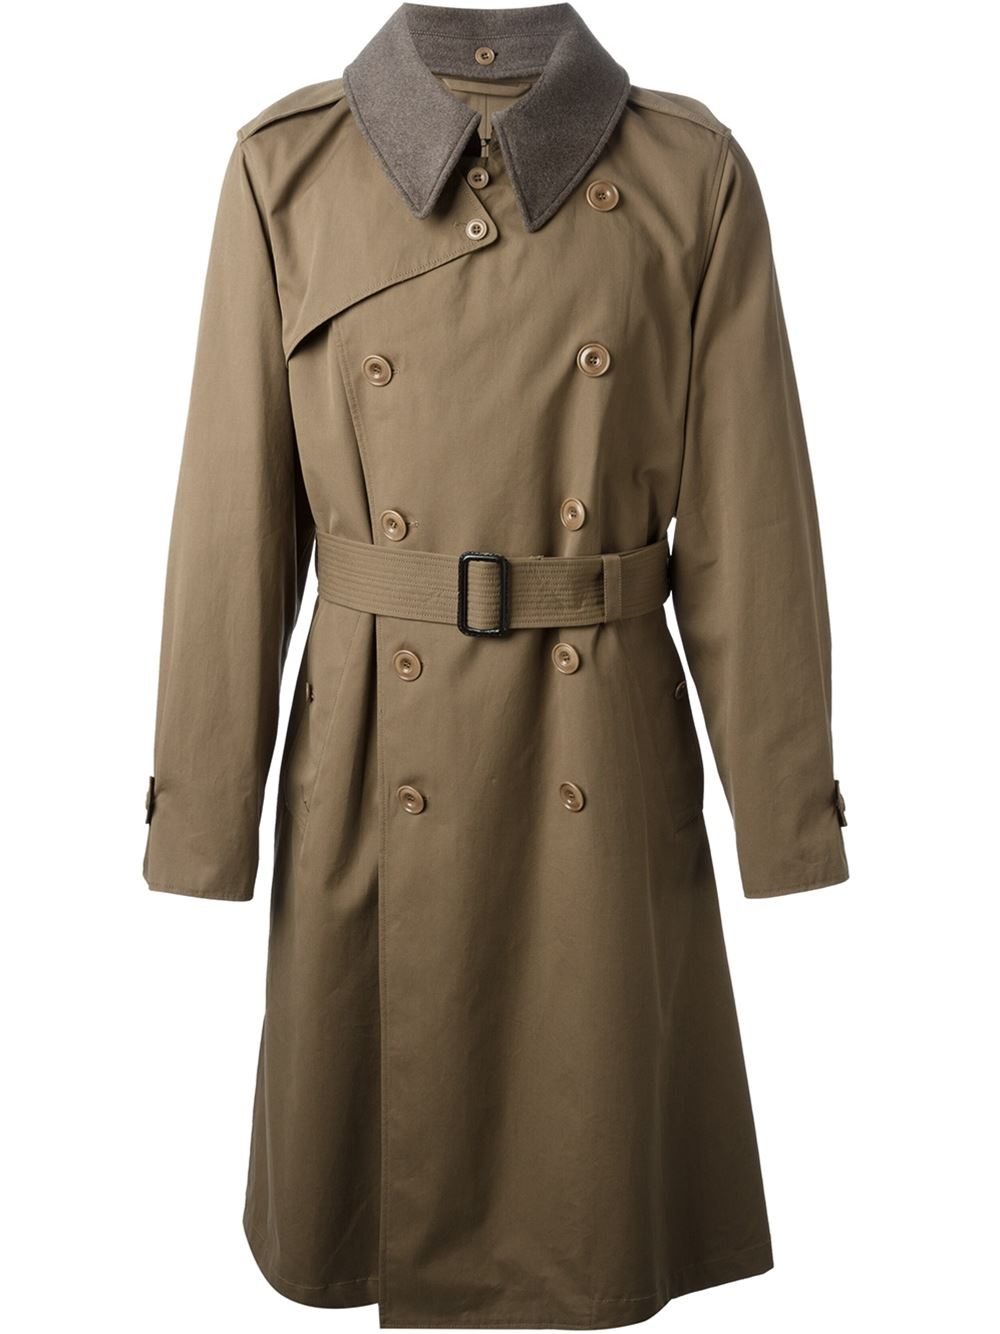 Christophe lemaire Contrasting Collar Trench Coat in Brown for Men | Lyst